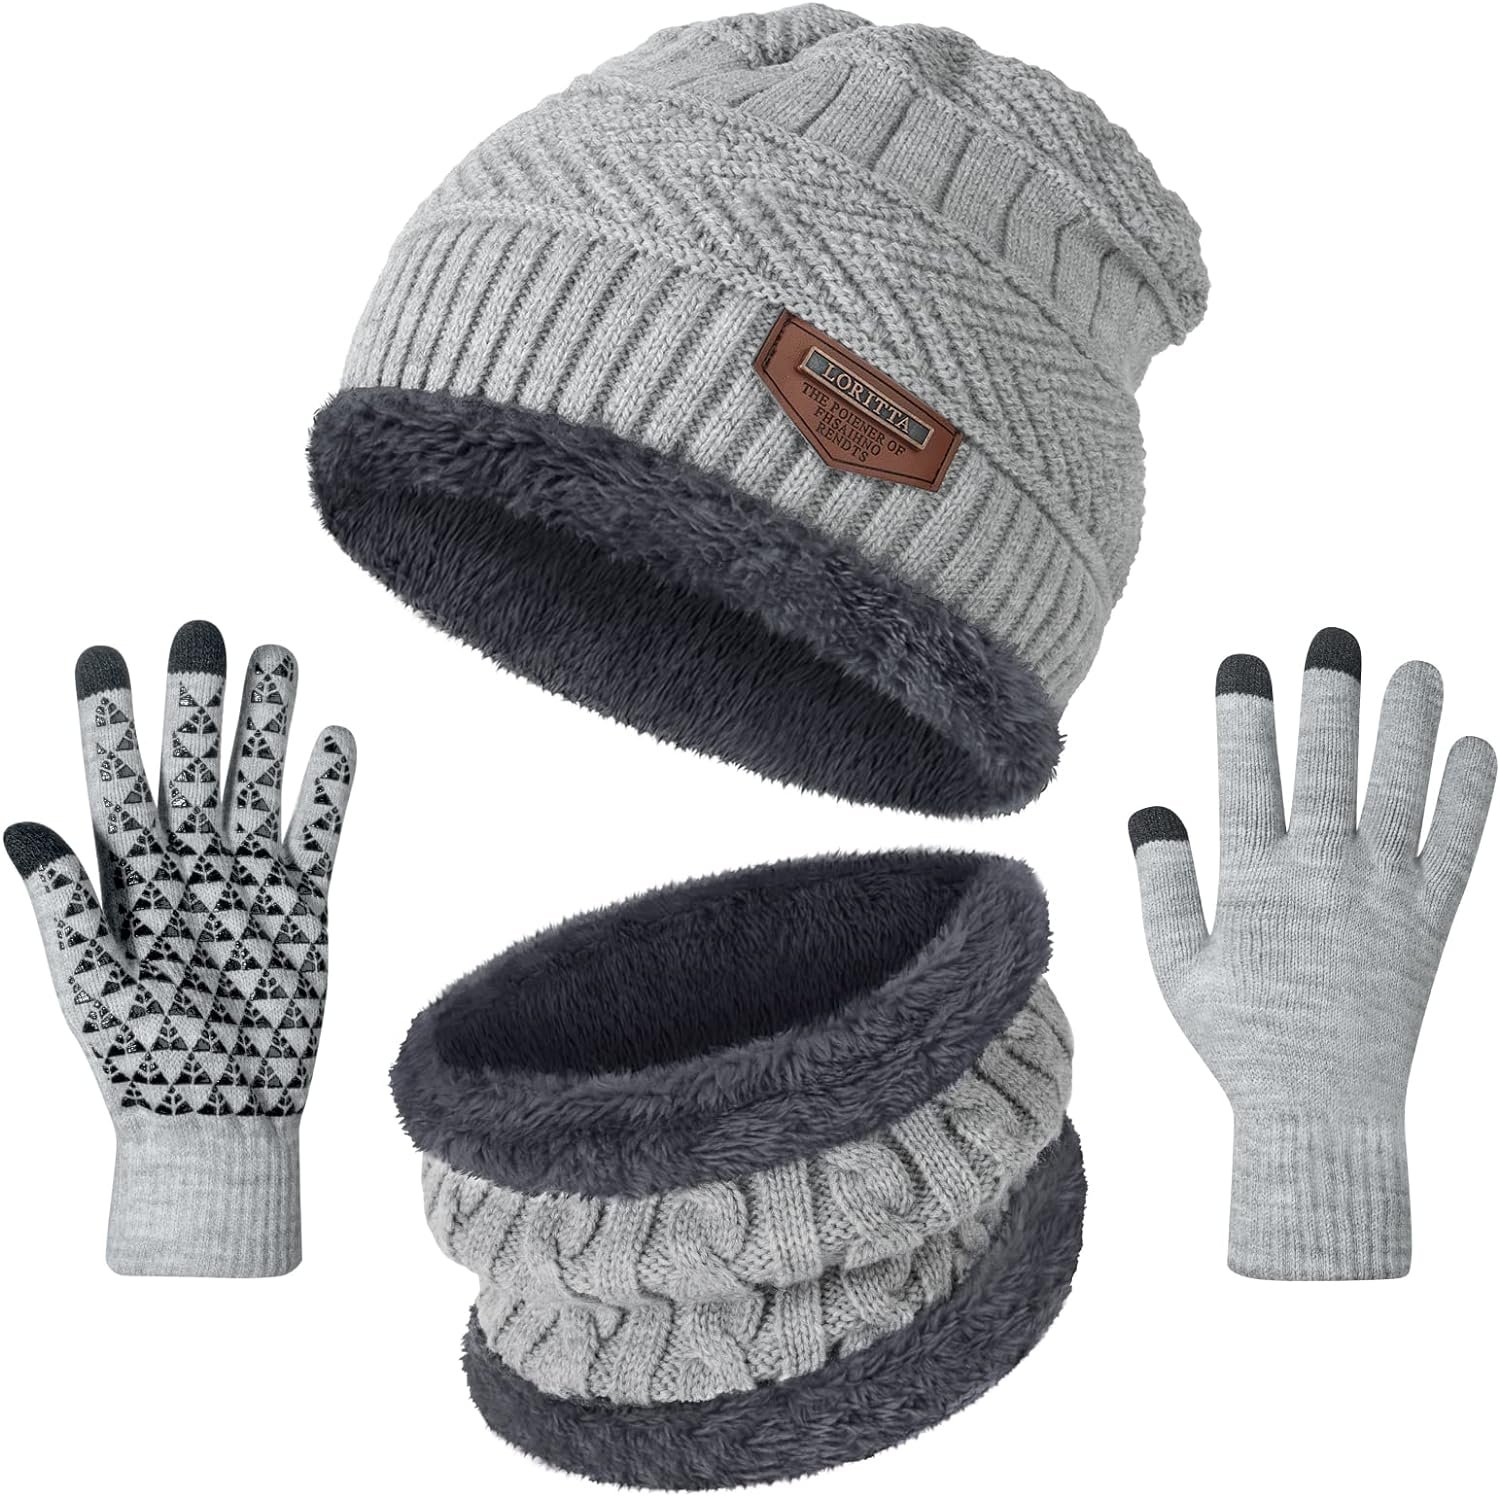 Winter Beanie Hats Scarf Gloves Set Review